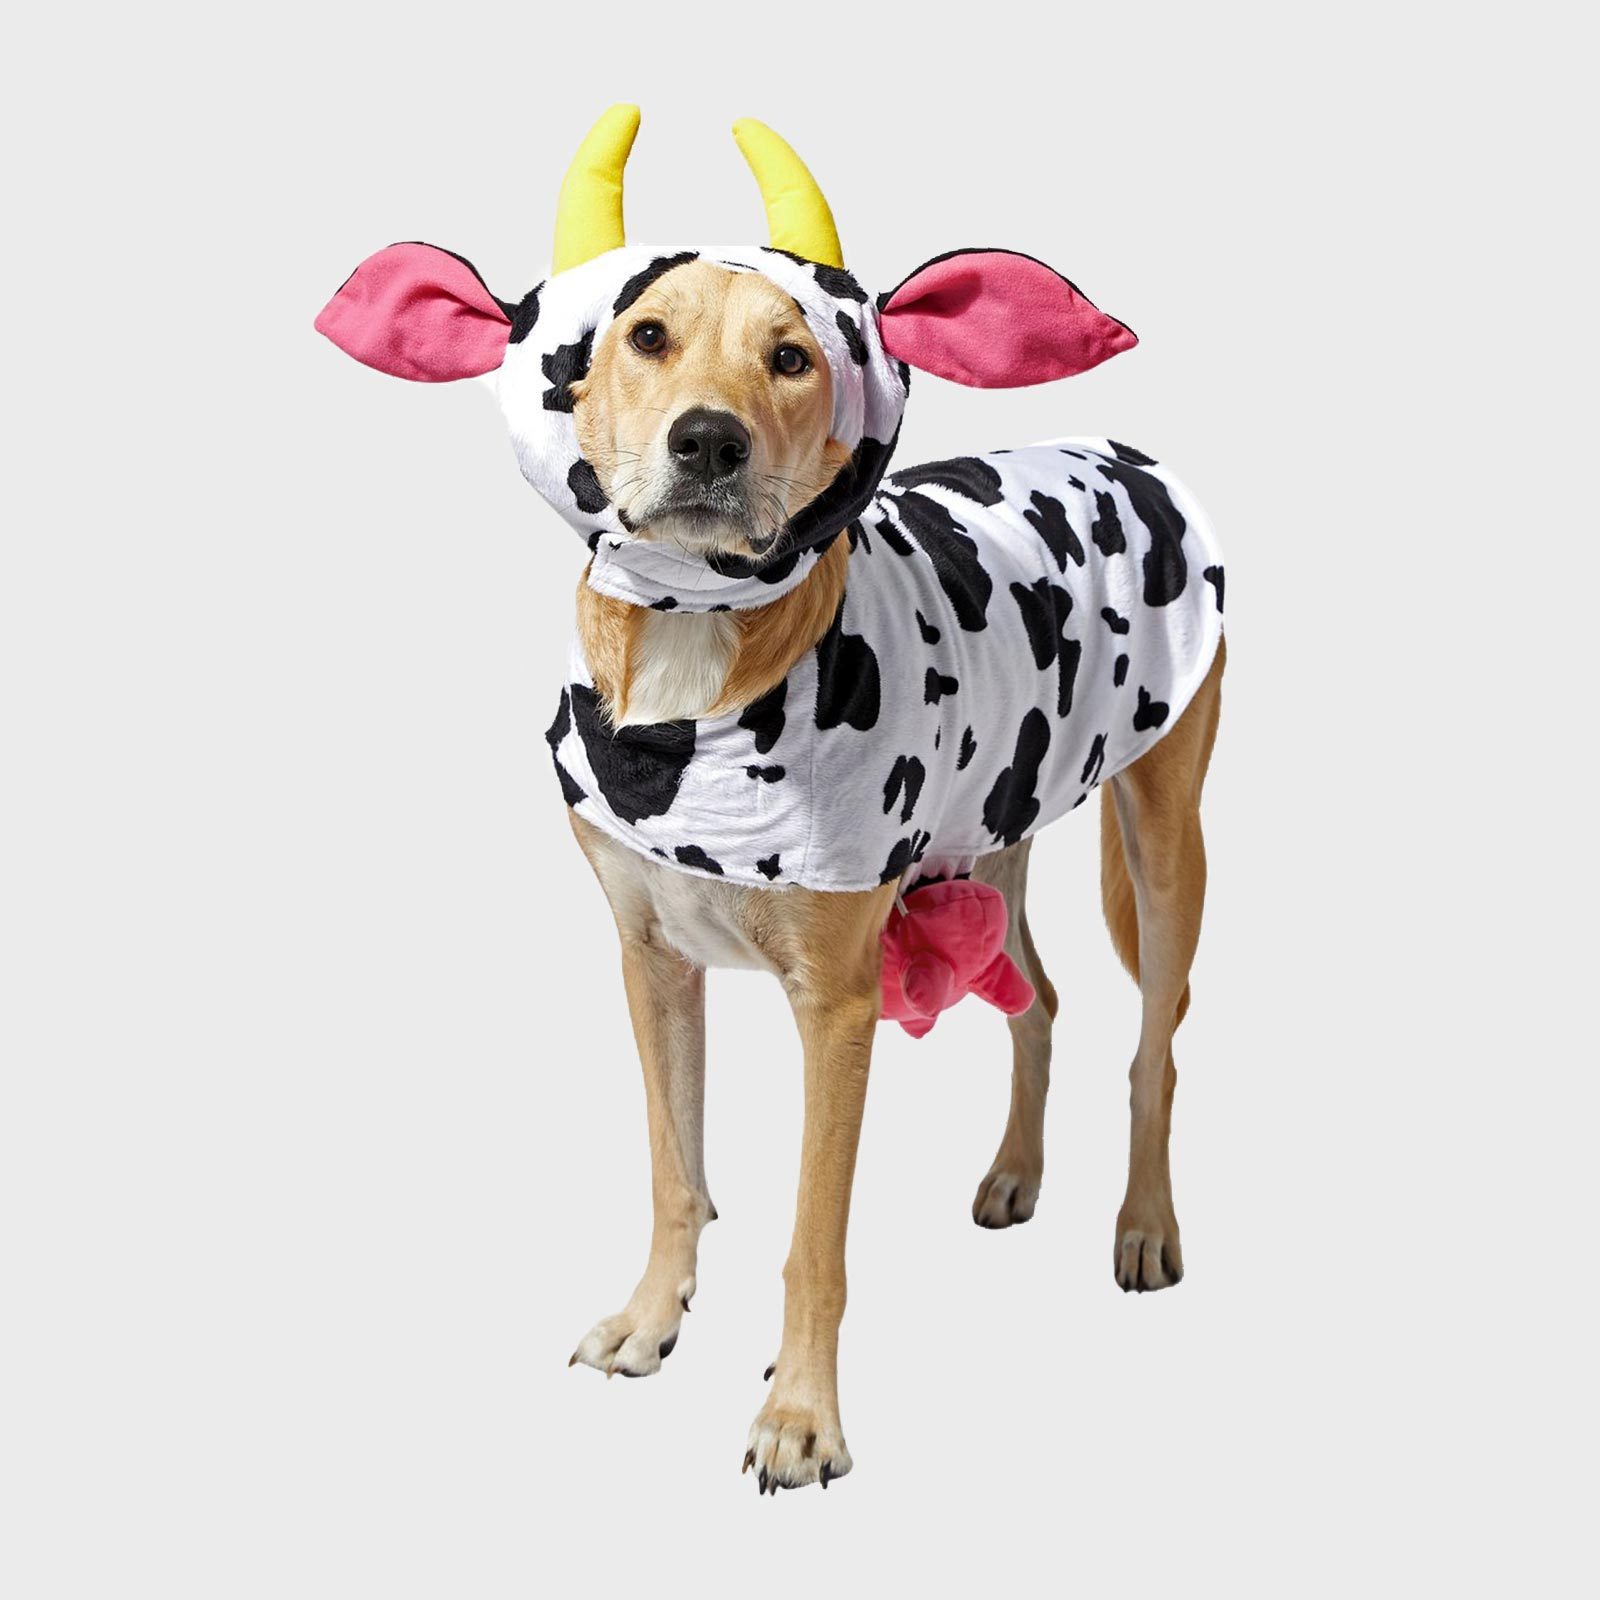 Rd Ecomm Cow Costume Via Chewy.com